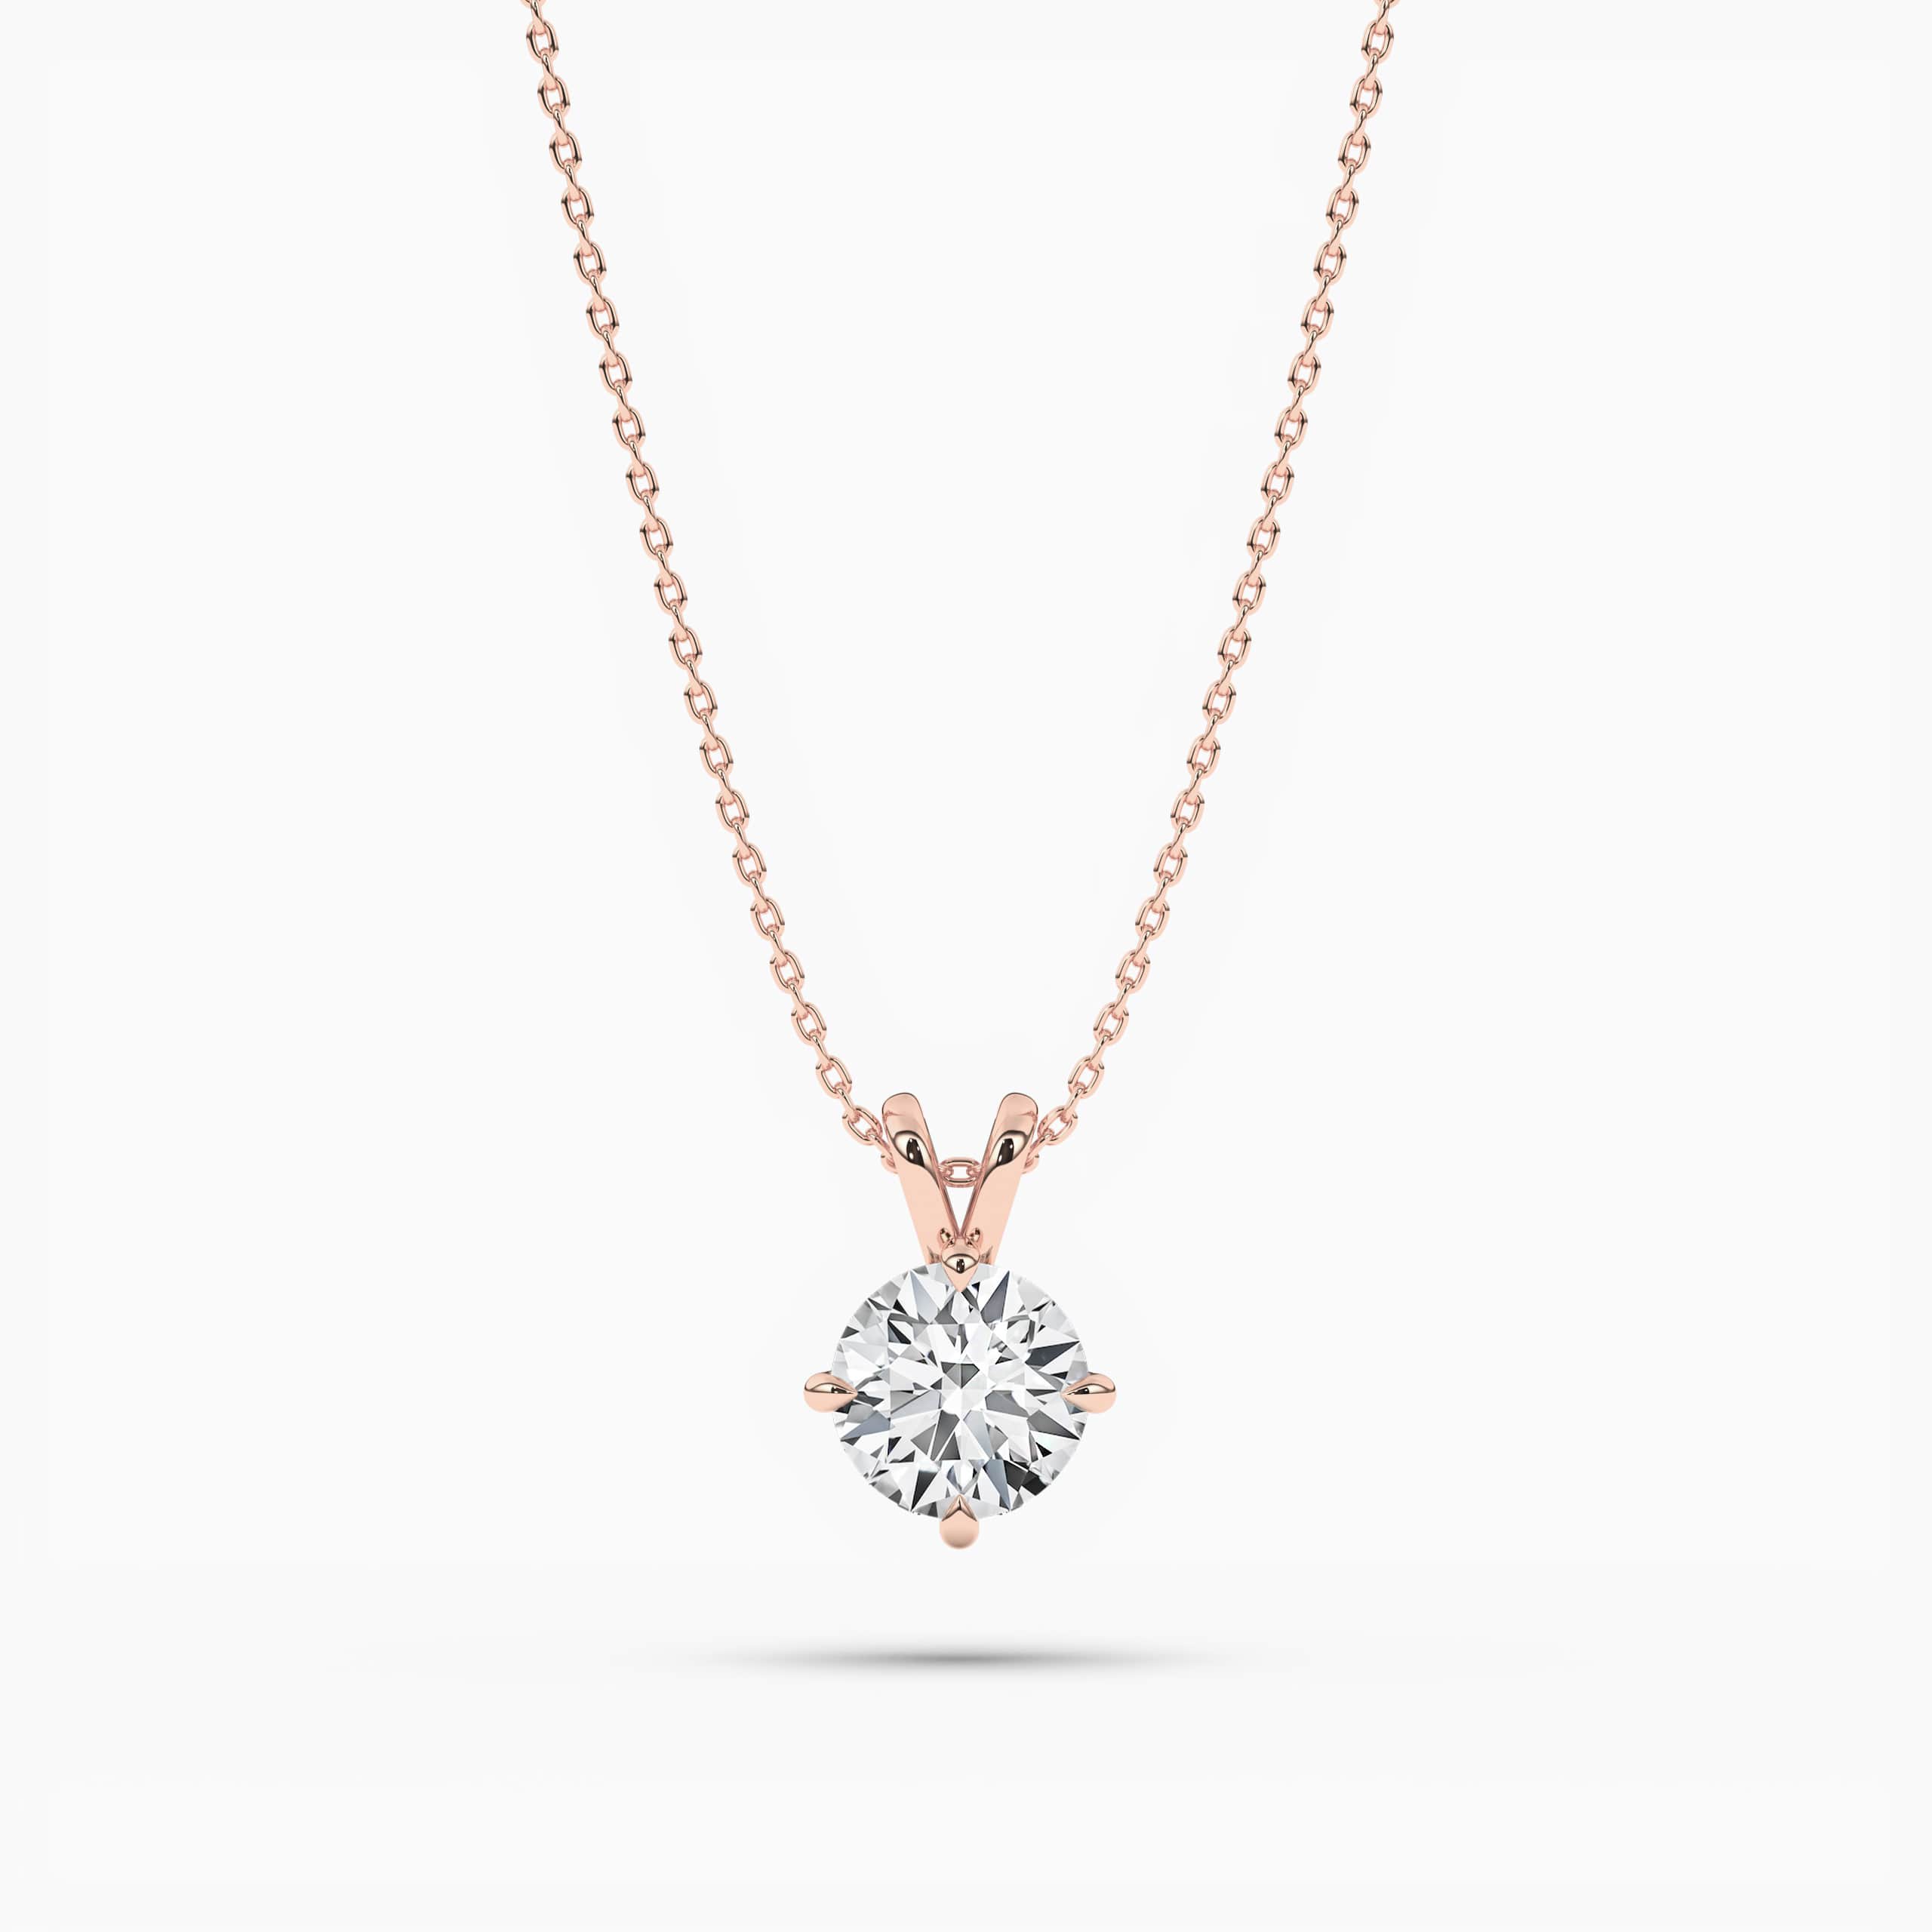 Round Cut Diamond Solitaire Pendant Necklace in Rose Gold